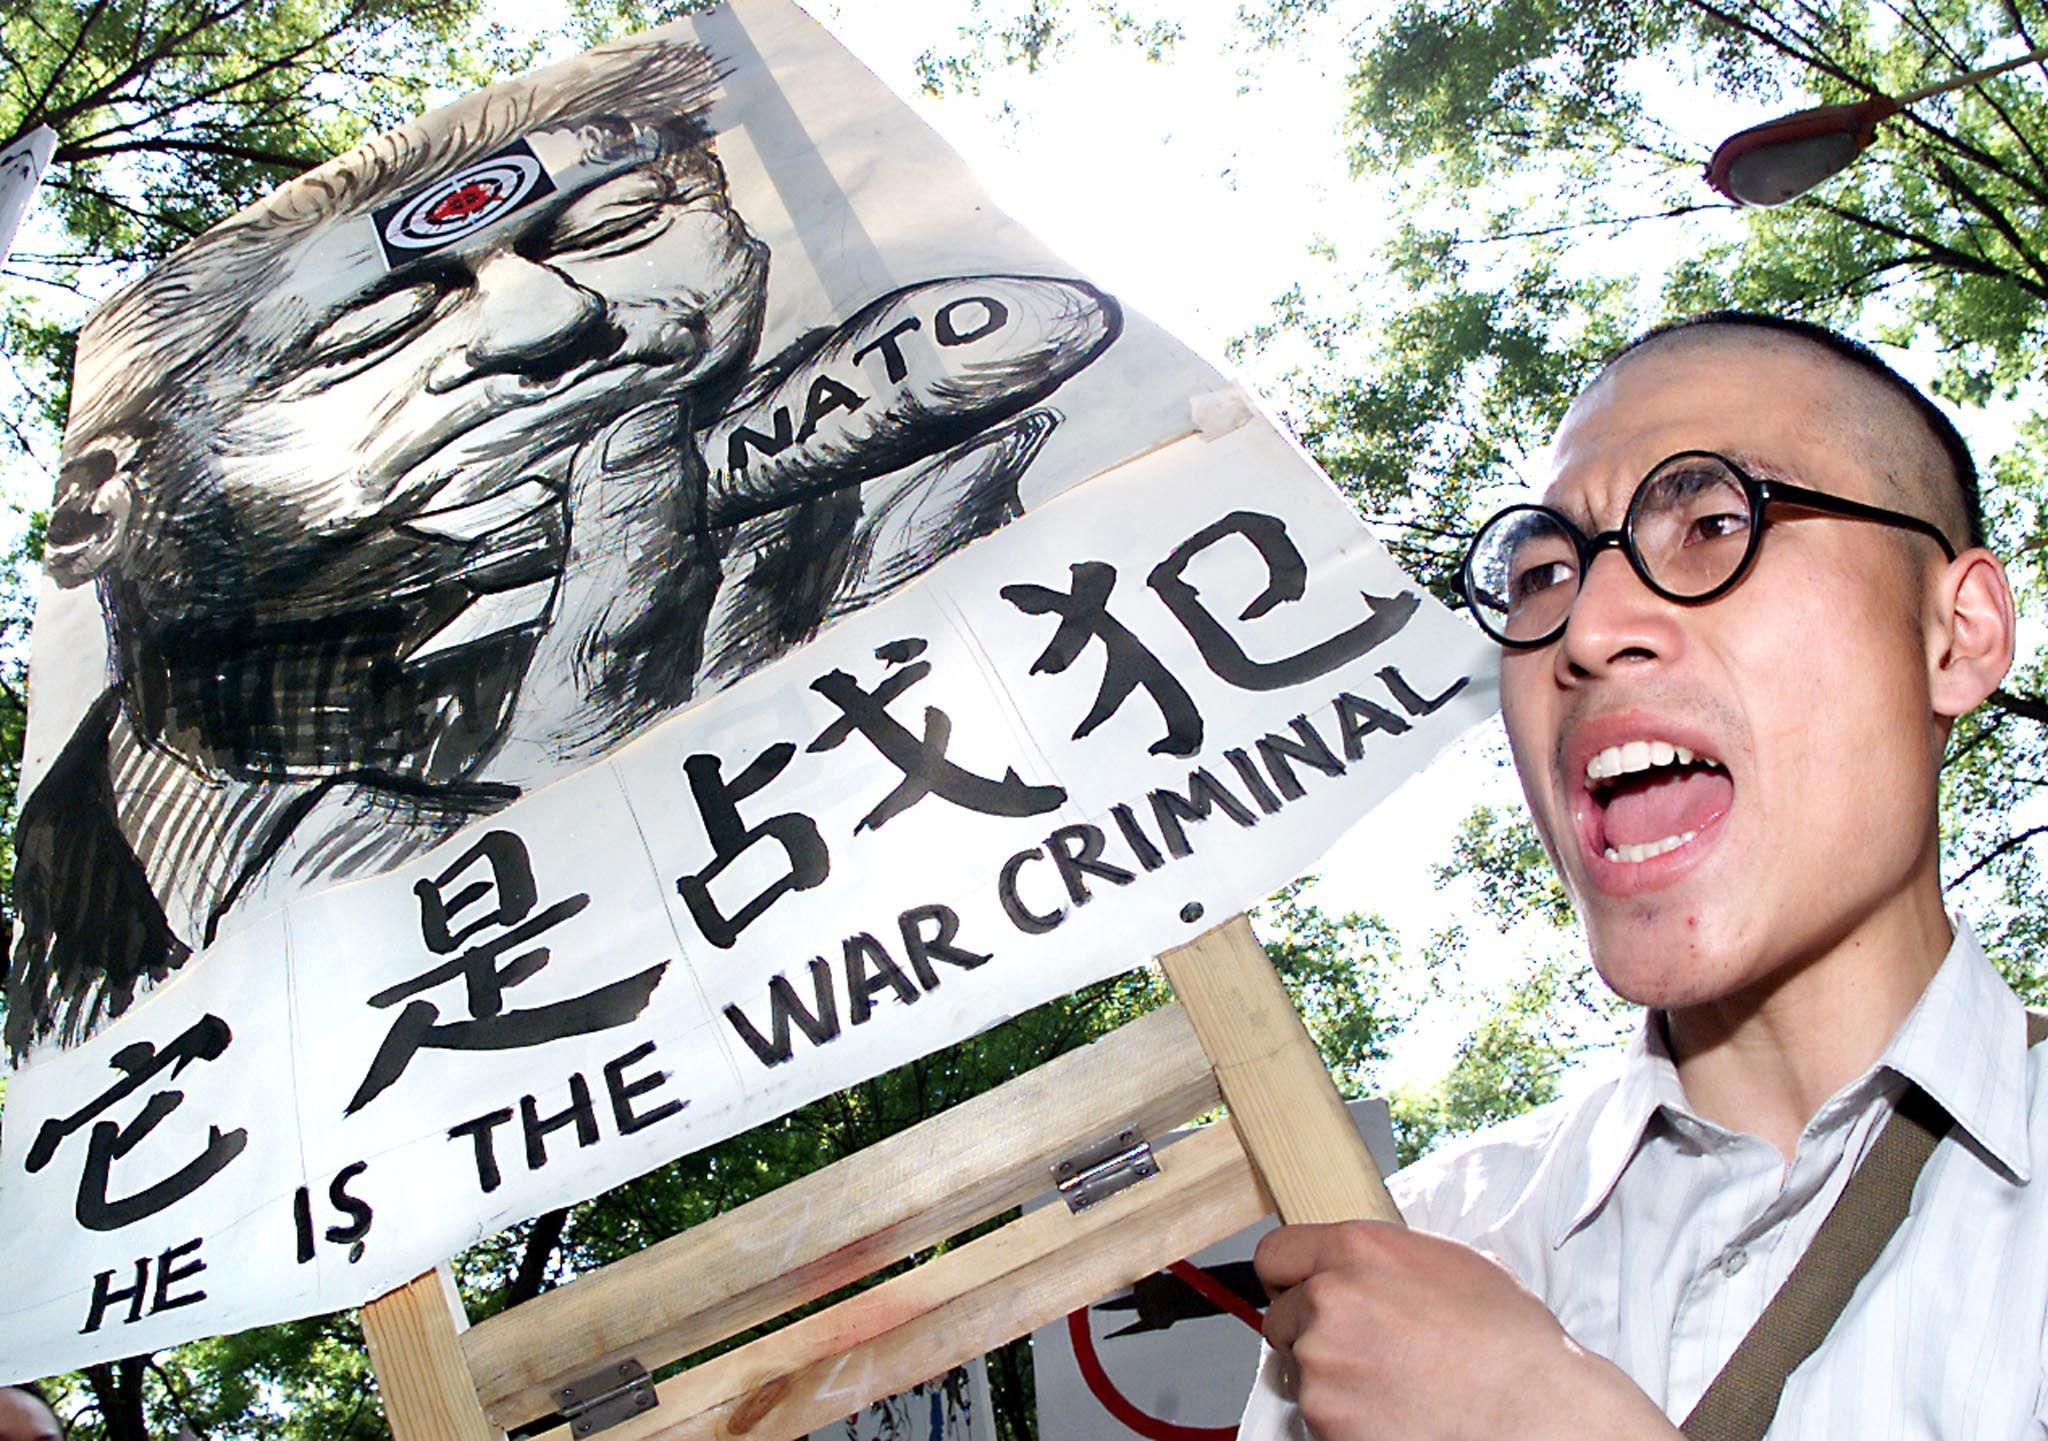 A student yells "kill Clinton" as he carries a giant caricature of the US President10 May 1999 in Beijing as hundreds of demonstrators march to the US embassy in the third day of protests after the NATO bombing of the Chinese embassy in Belgrade.  Ignoring expression of regret from US President Bill Clinton and other NATO leaders, up to 100,000 demonstrators flooded the streets surrounding the US embassy in Beijing in the biggest protest seen in the capital since the 1989 pro-democracy movement.  US ambassador to China James Sassar said that personnel at his embassy had been "hostages" for the last 48 hours.      (ELECTRONIC IMAGE)       AFP PHOTO/Stephen SHAVER (Photo by STEPHEN SHAVER / AFP)